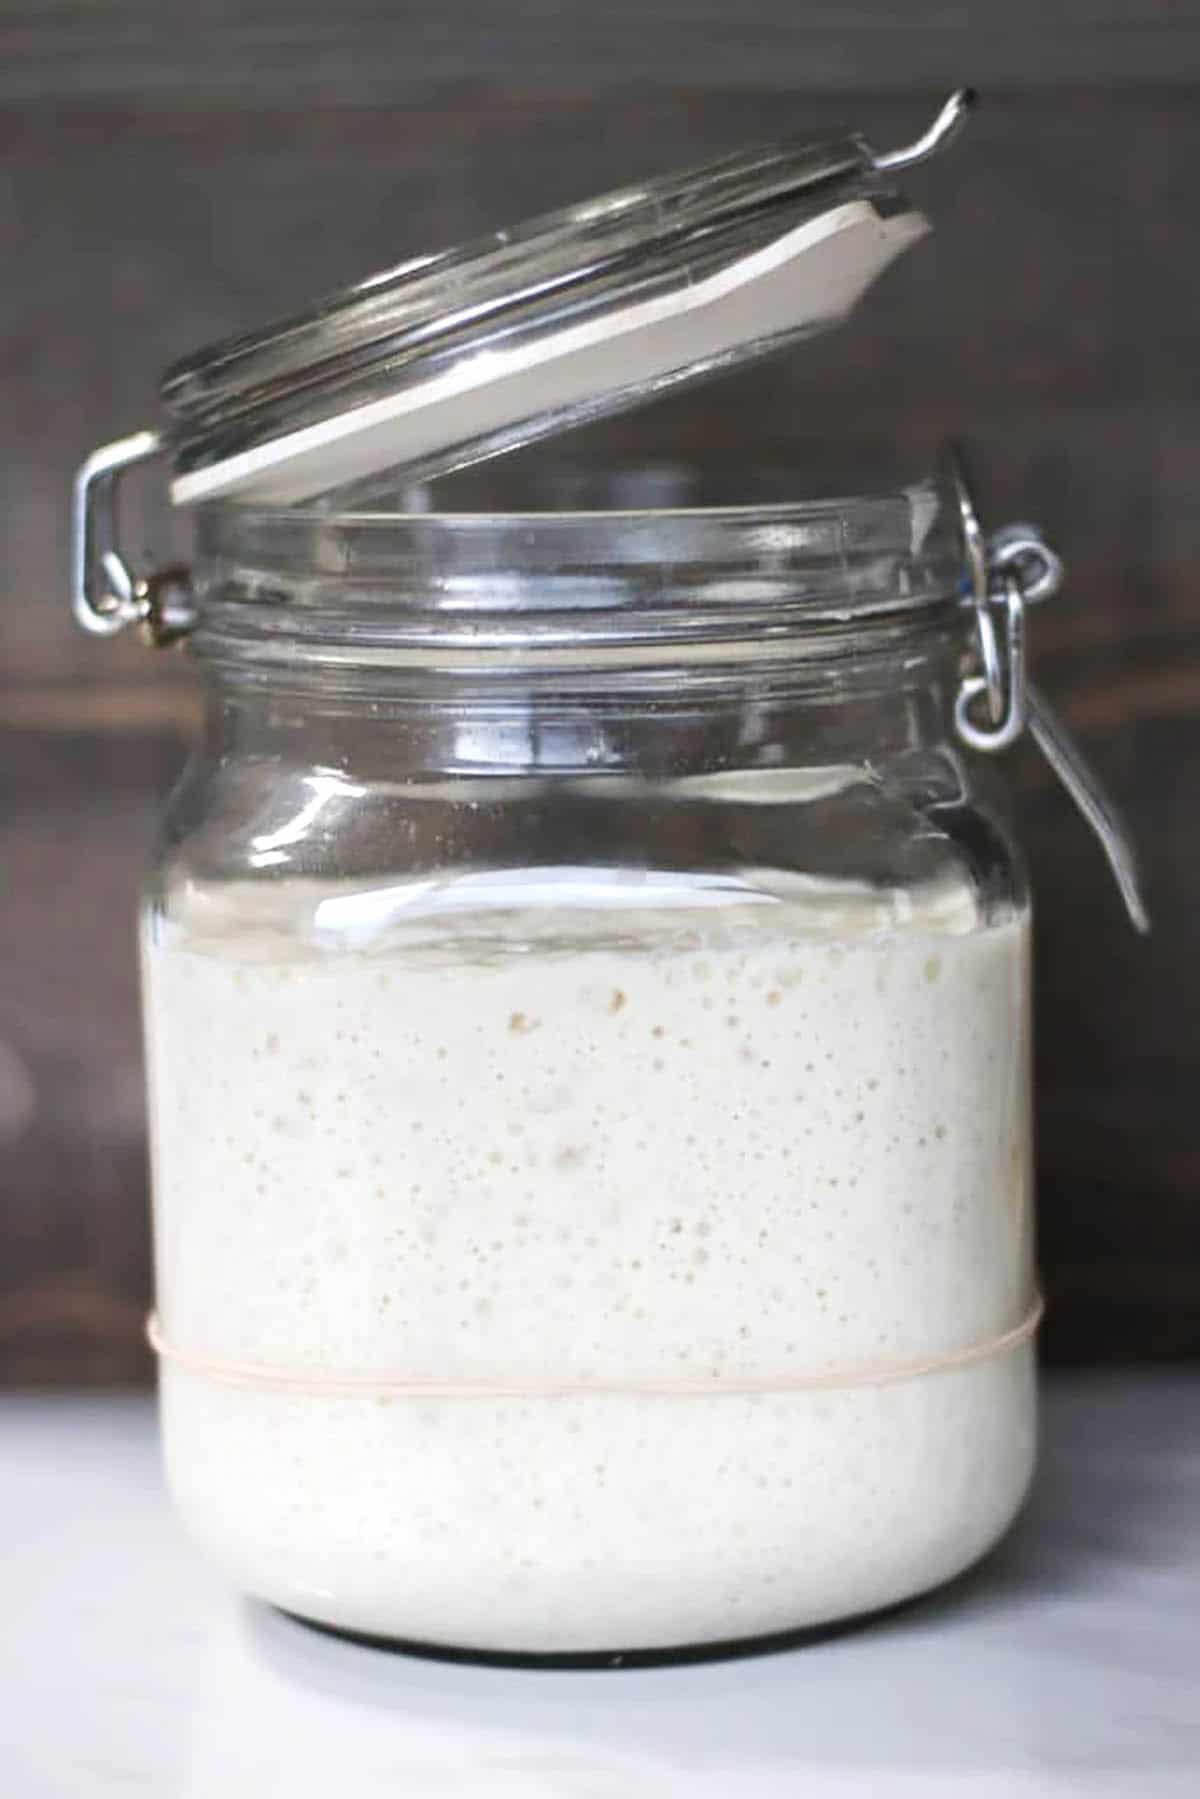 A flip lock jar with the lid open and a rubber band around the middle measuring the growth of a sourdough starter.